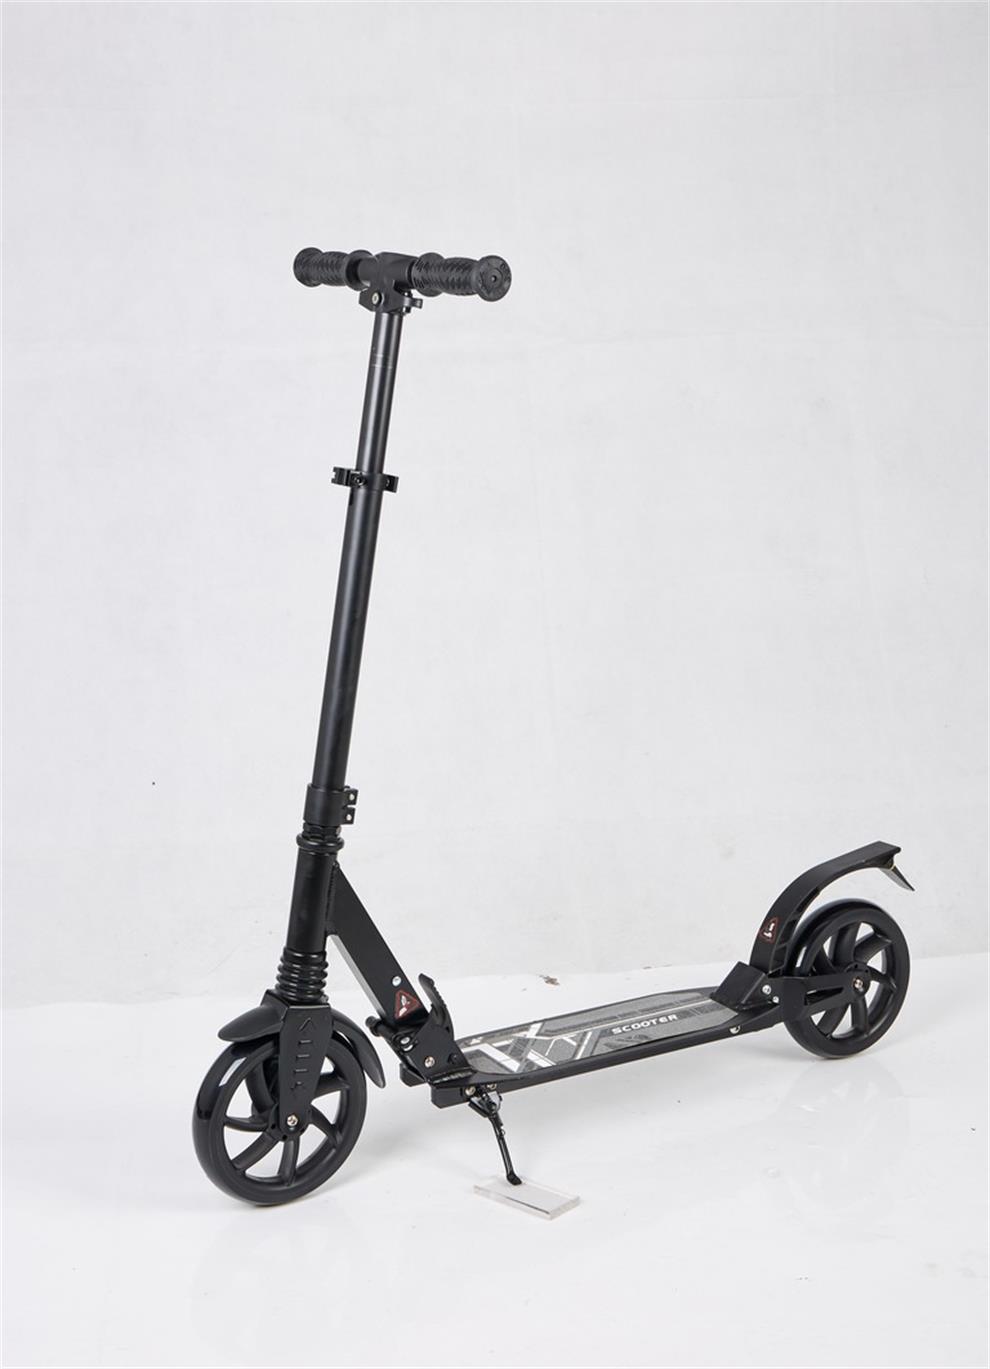 38003 foldable big wheel 200mm kick scooter for teenages and adults